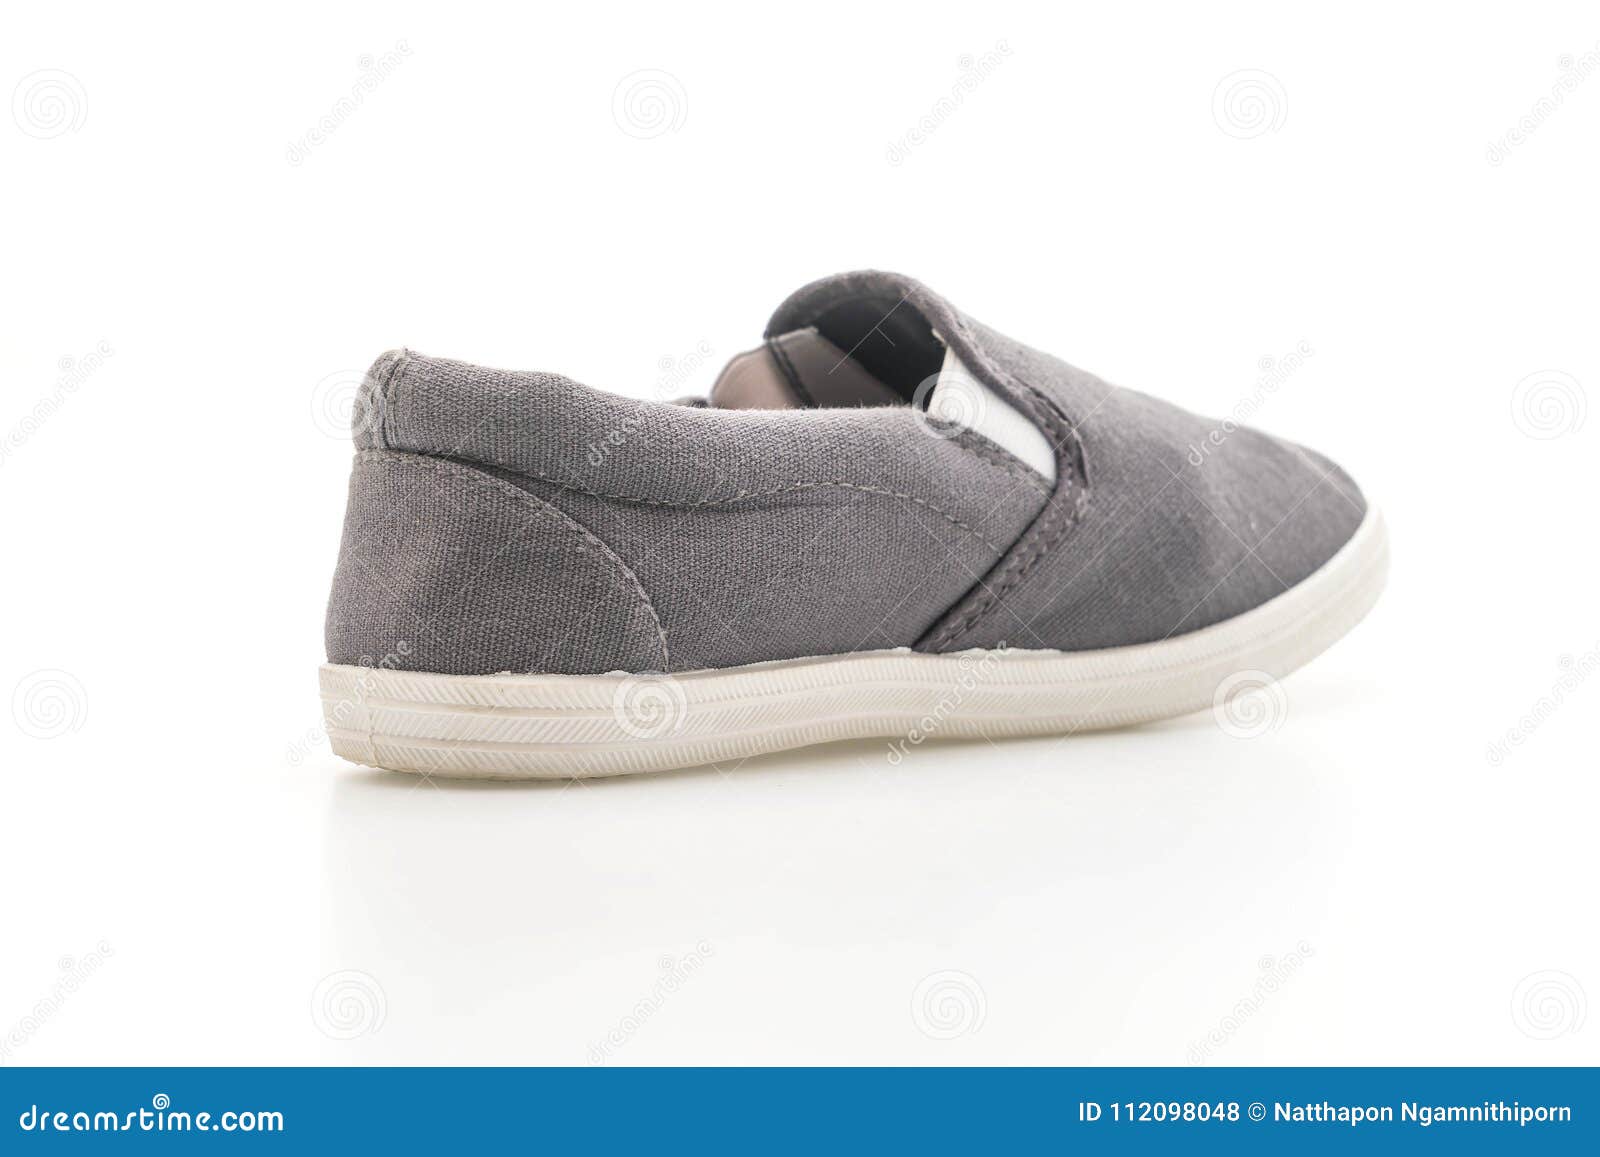 Grey Sneakers on White Background Stock Photo - Image of foot, fashion ...